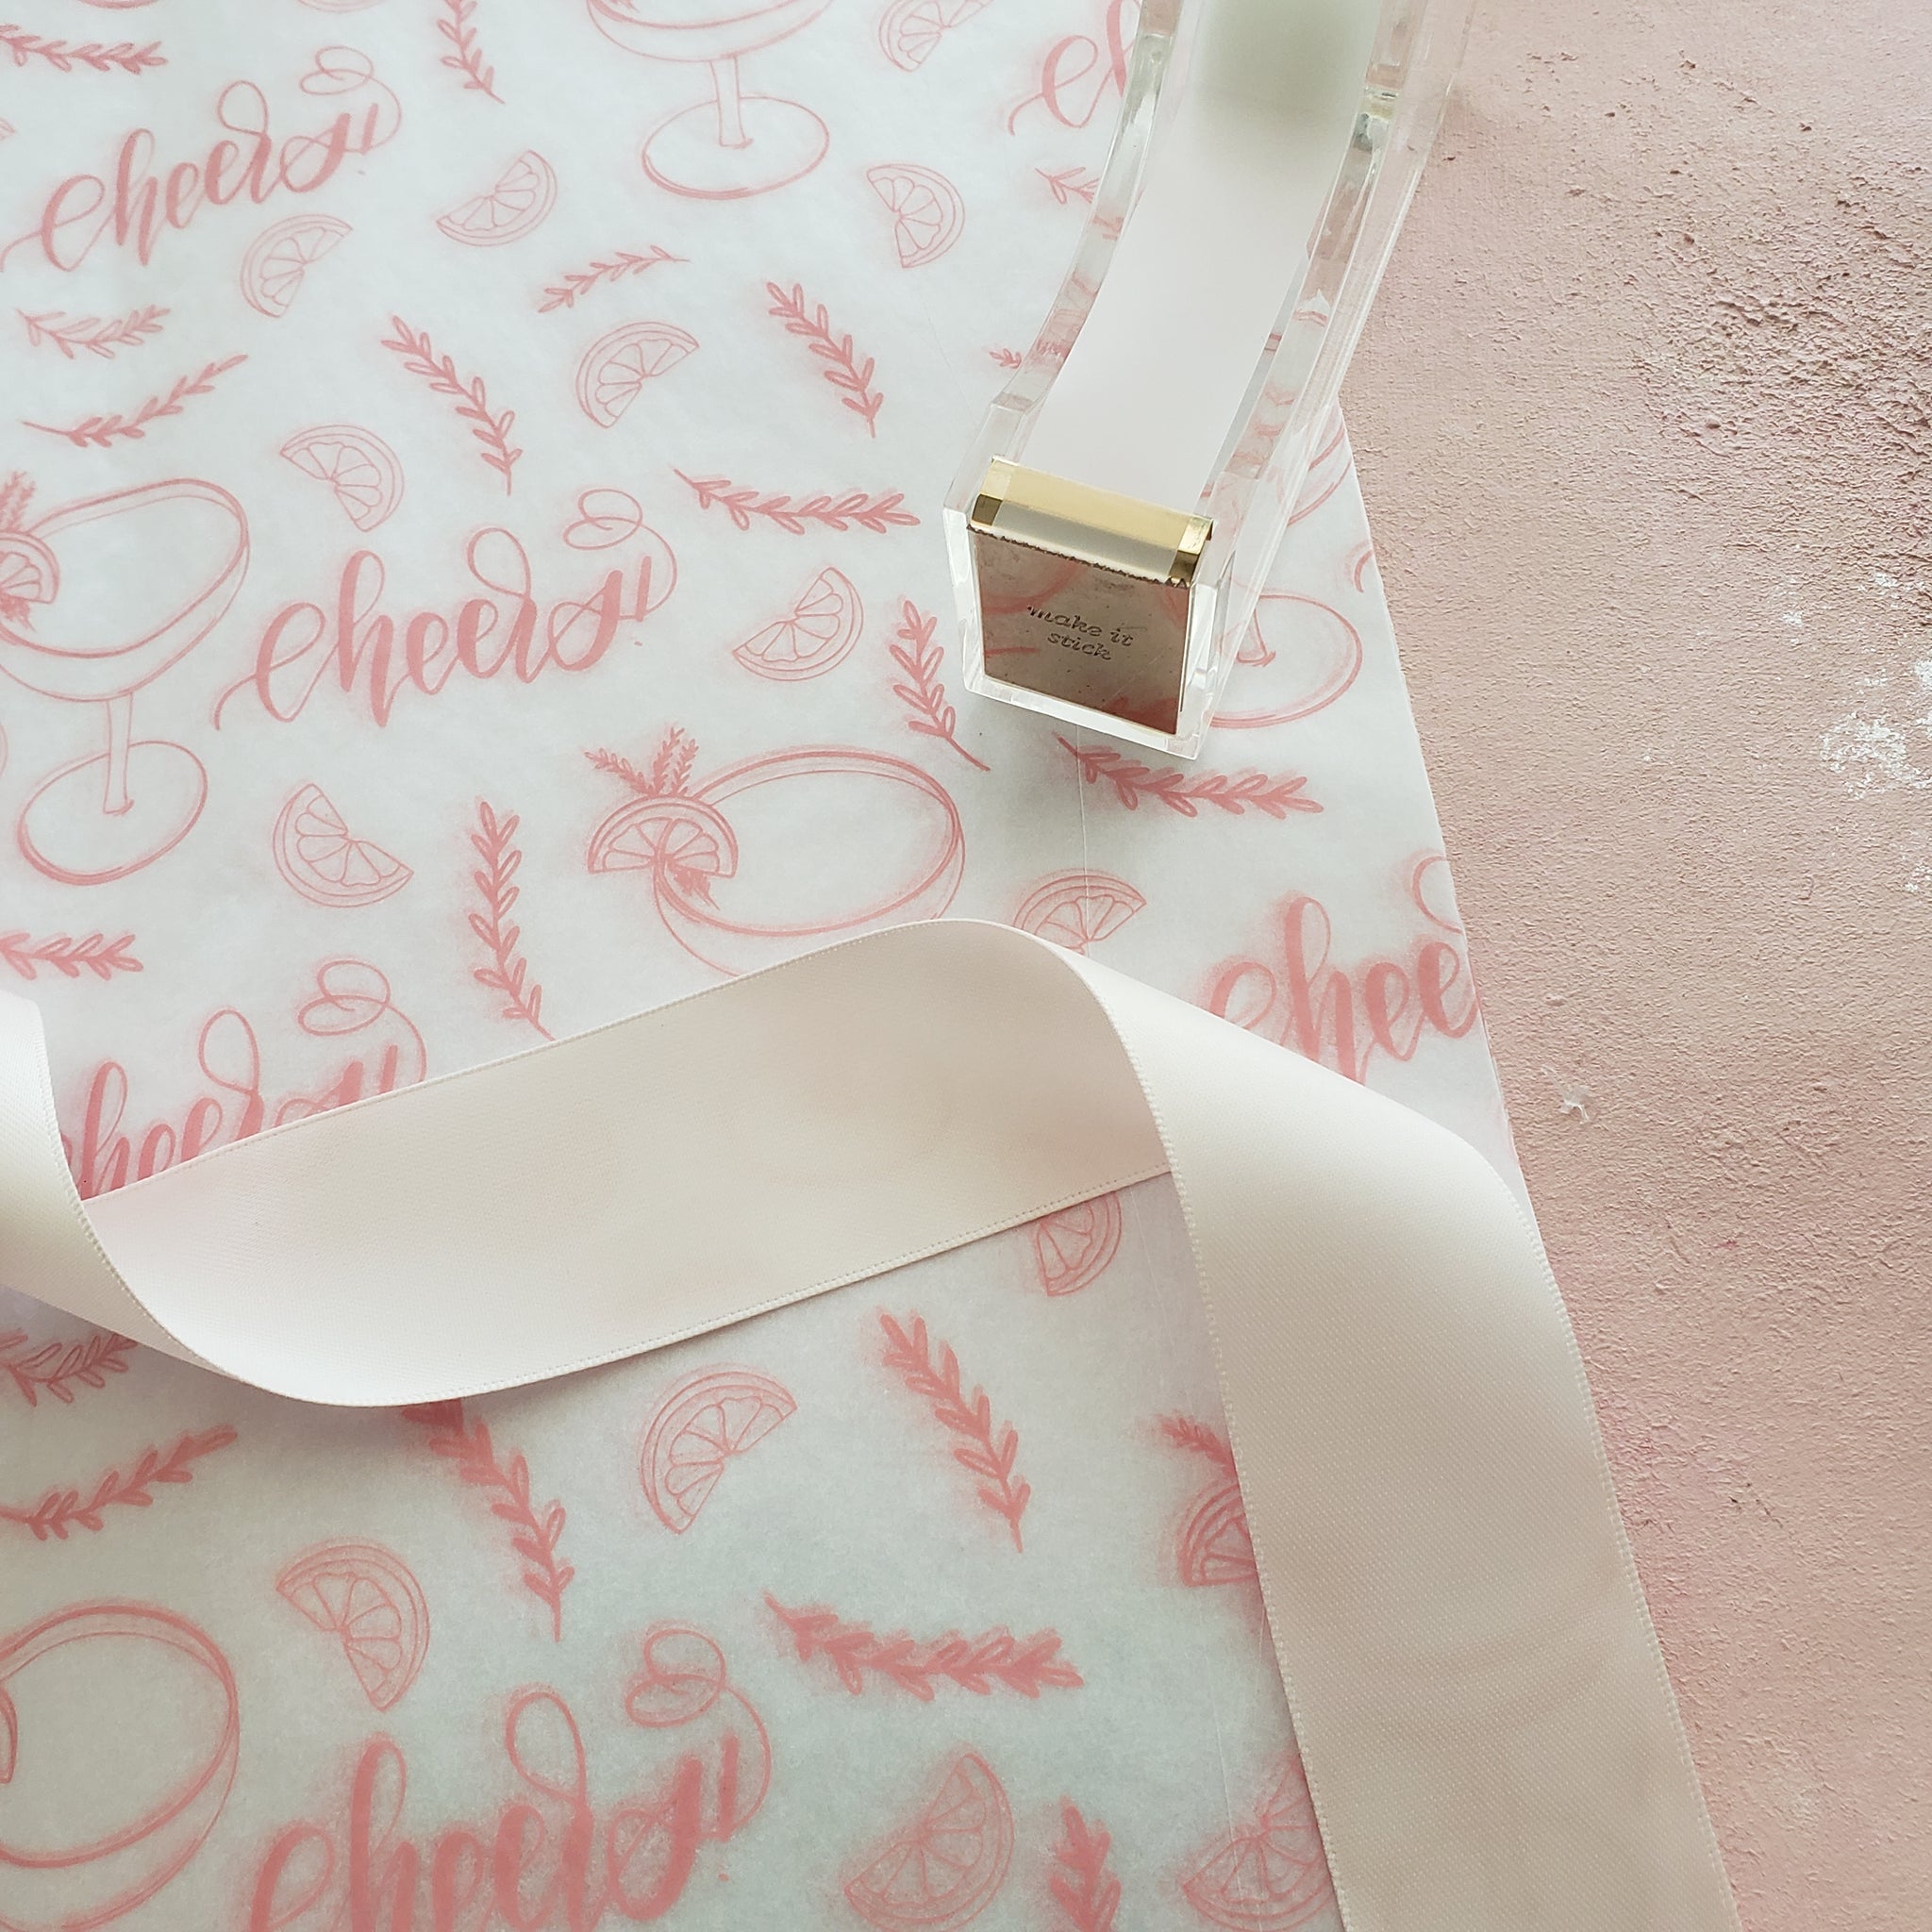 Blush Pink Tissue Paper for Gift Wrapping - Cheers Tissue Paper